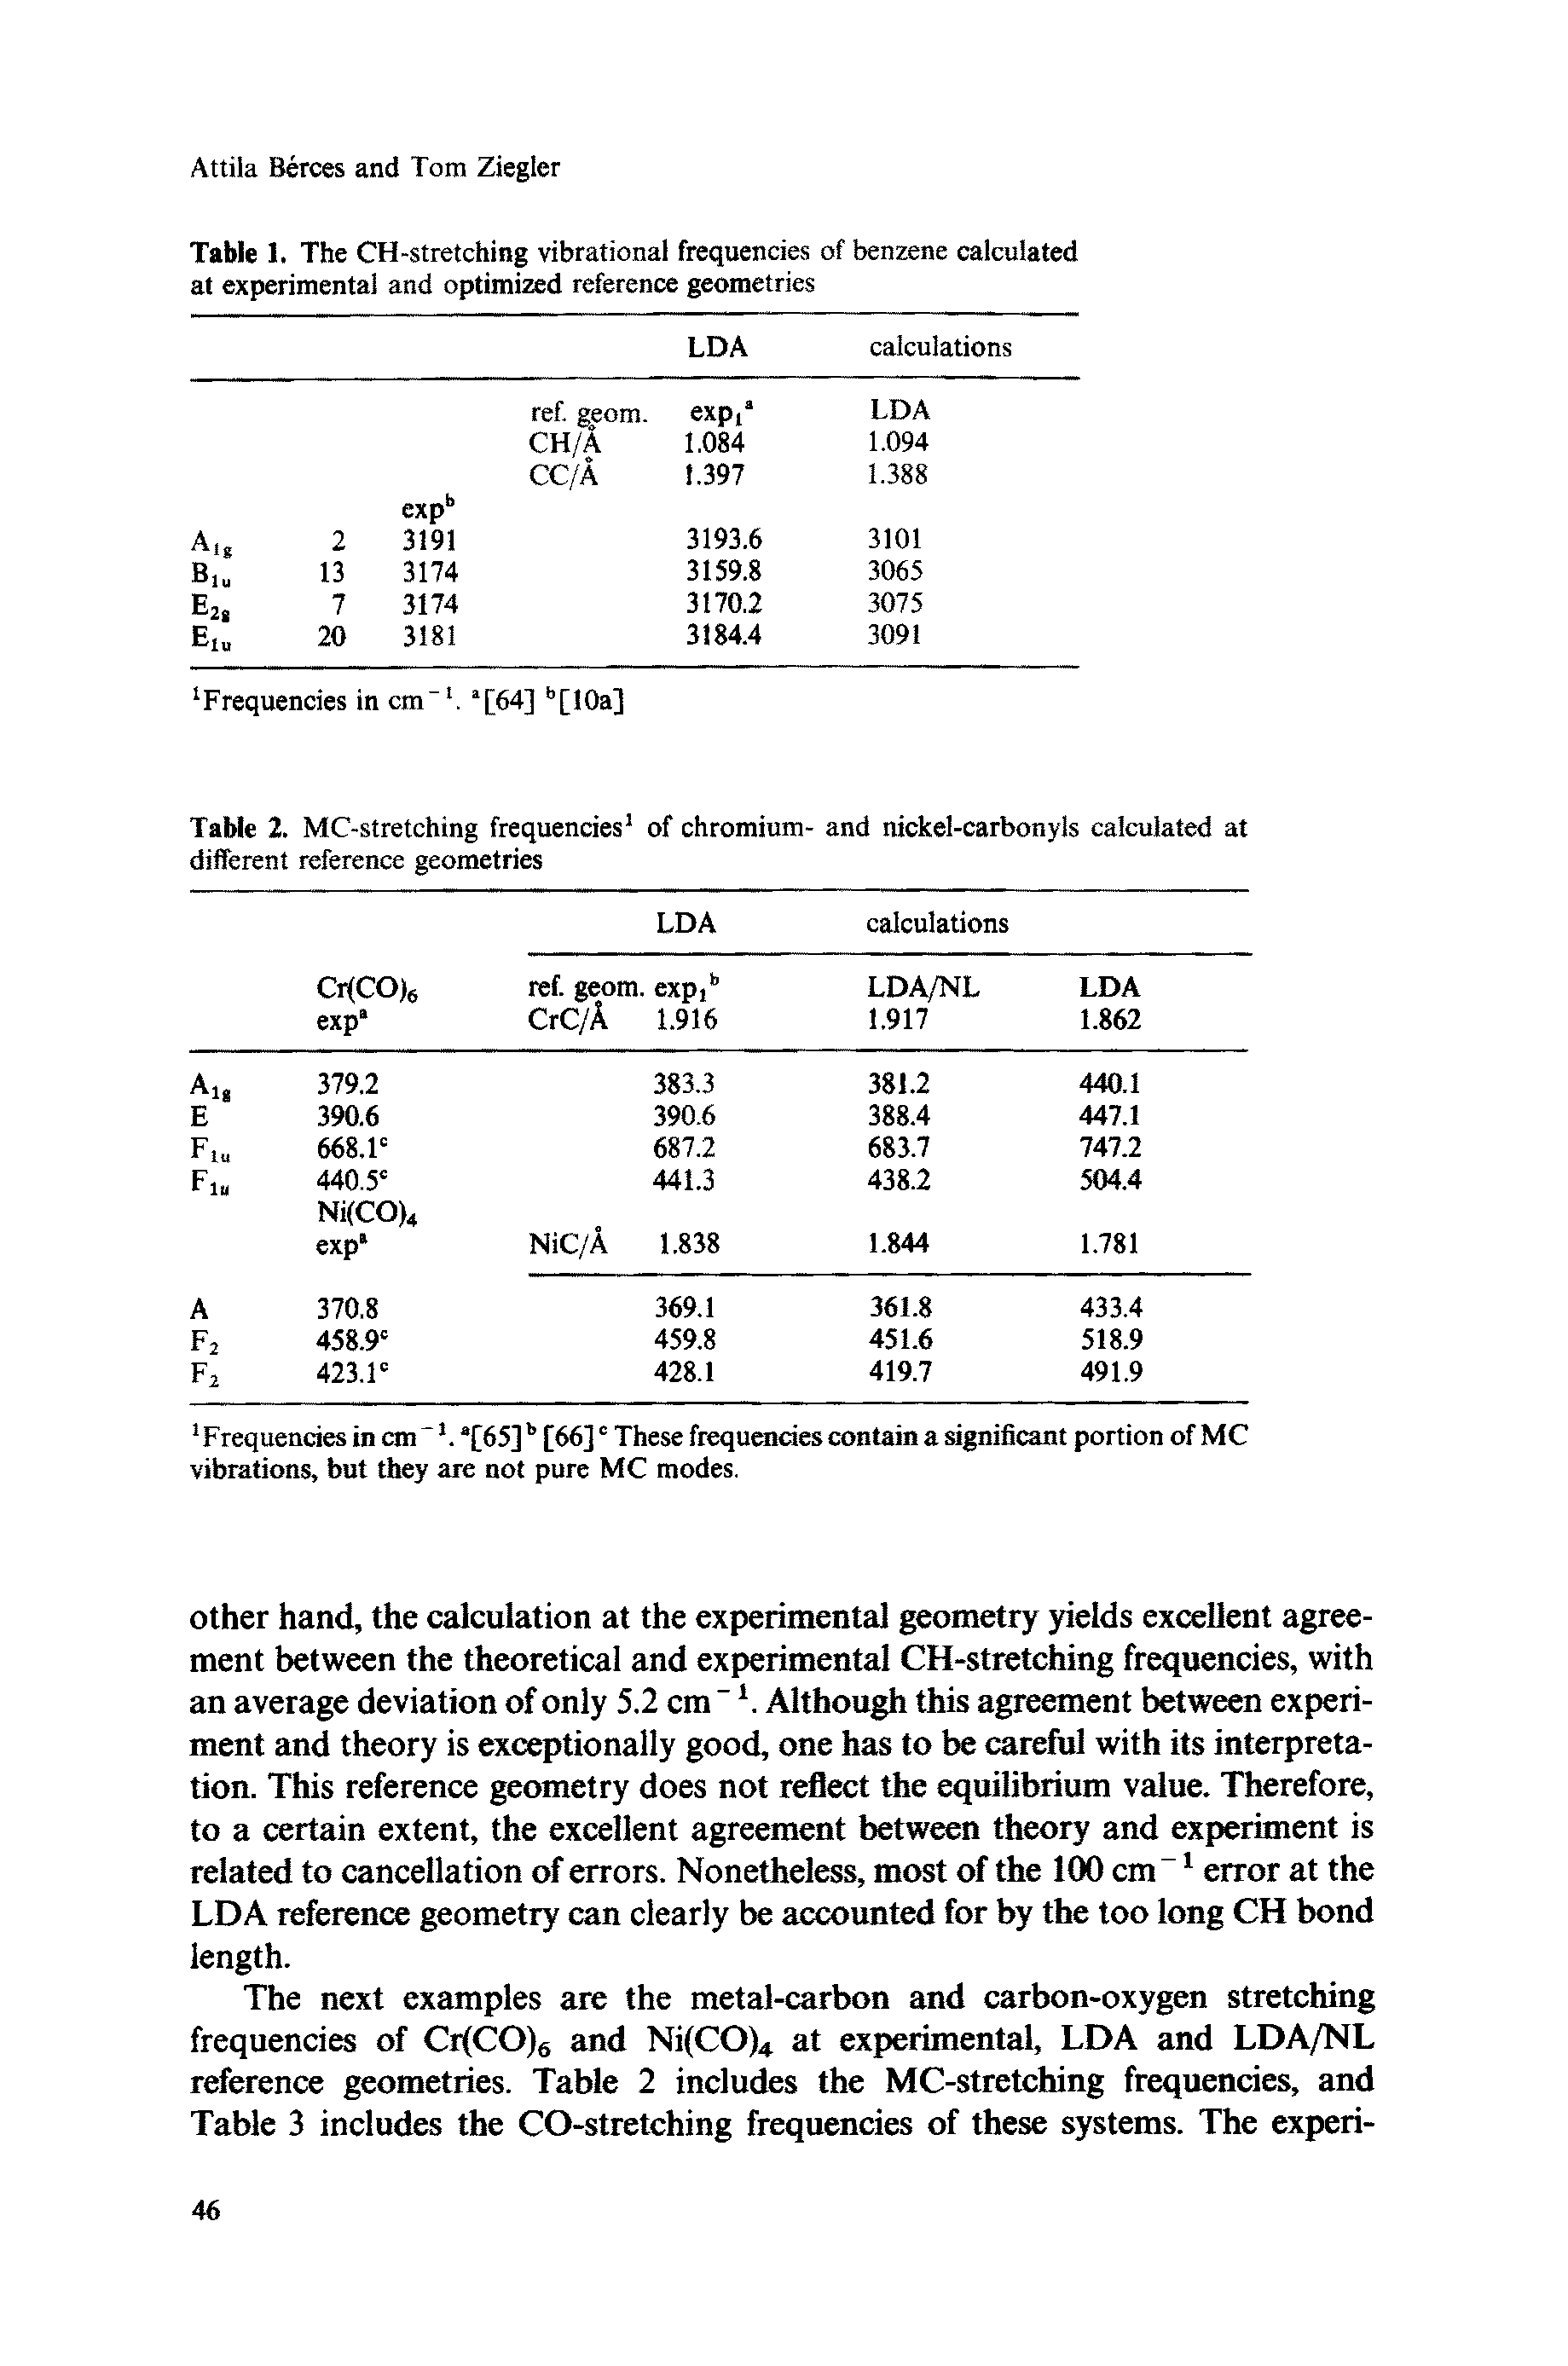 Table 1. The CH-stretching vibrational frequencies of benzene calculated at experimental and optimized reference geometries...